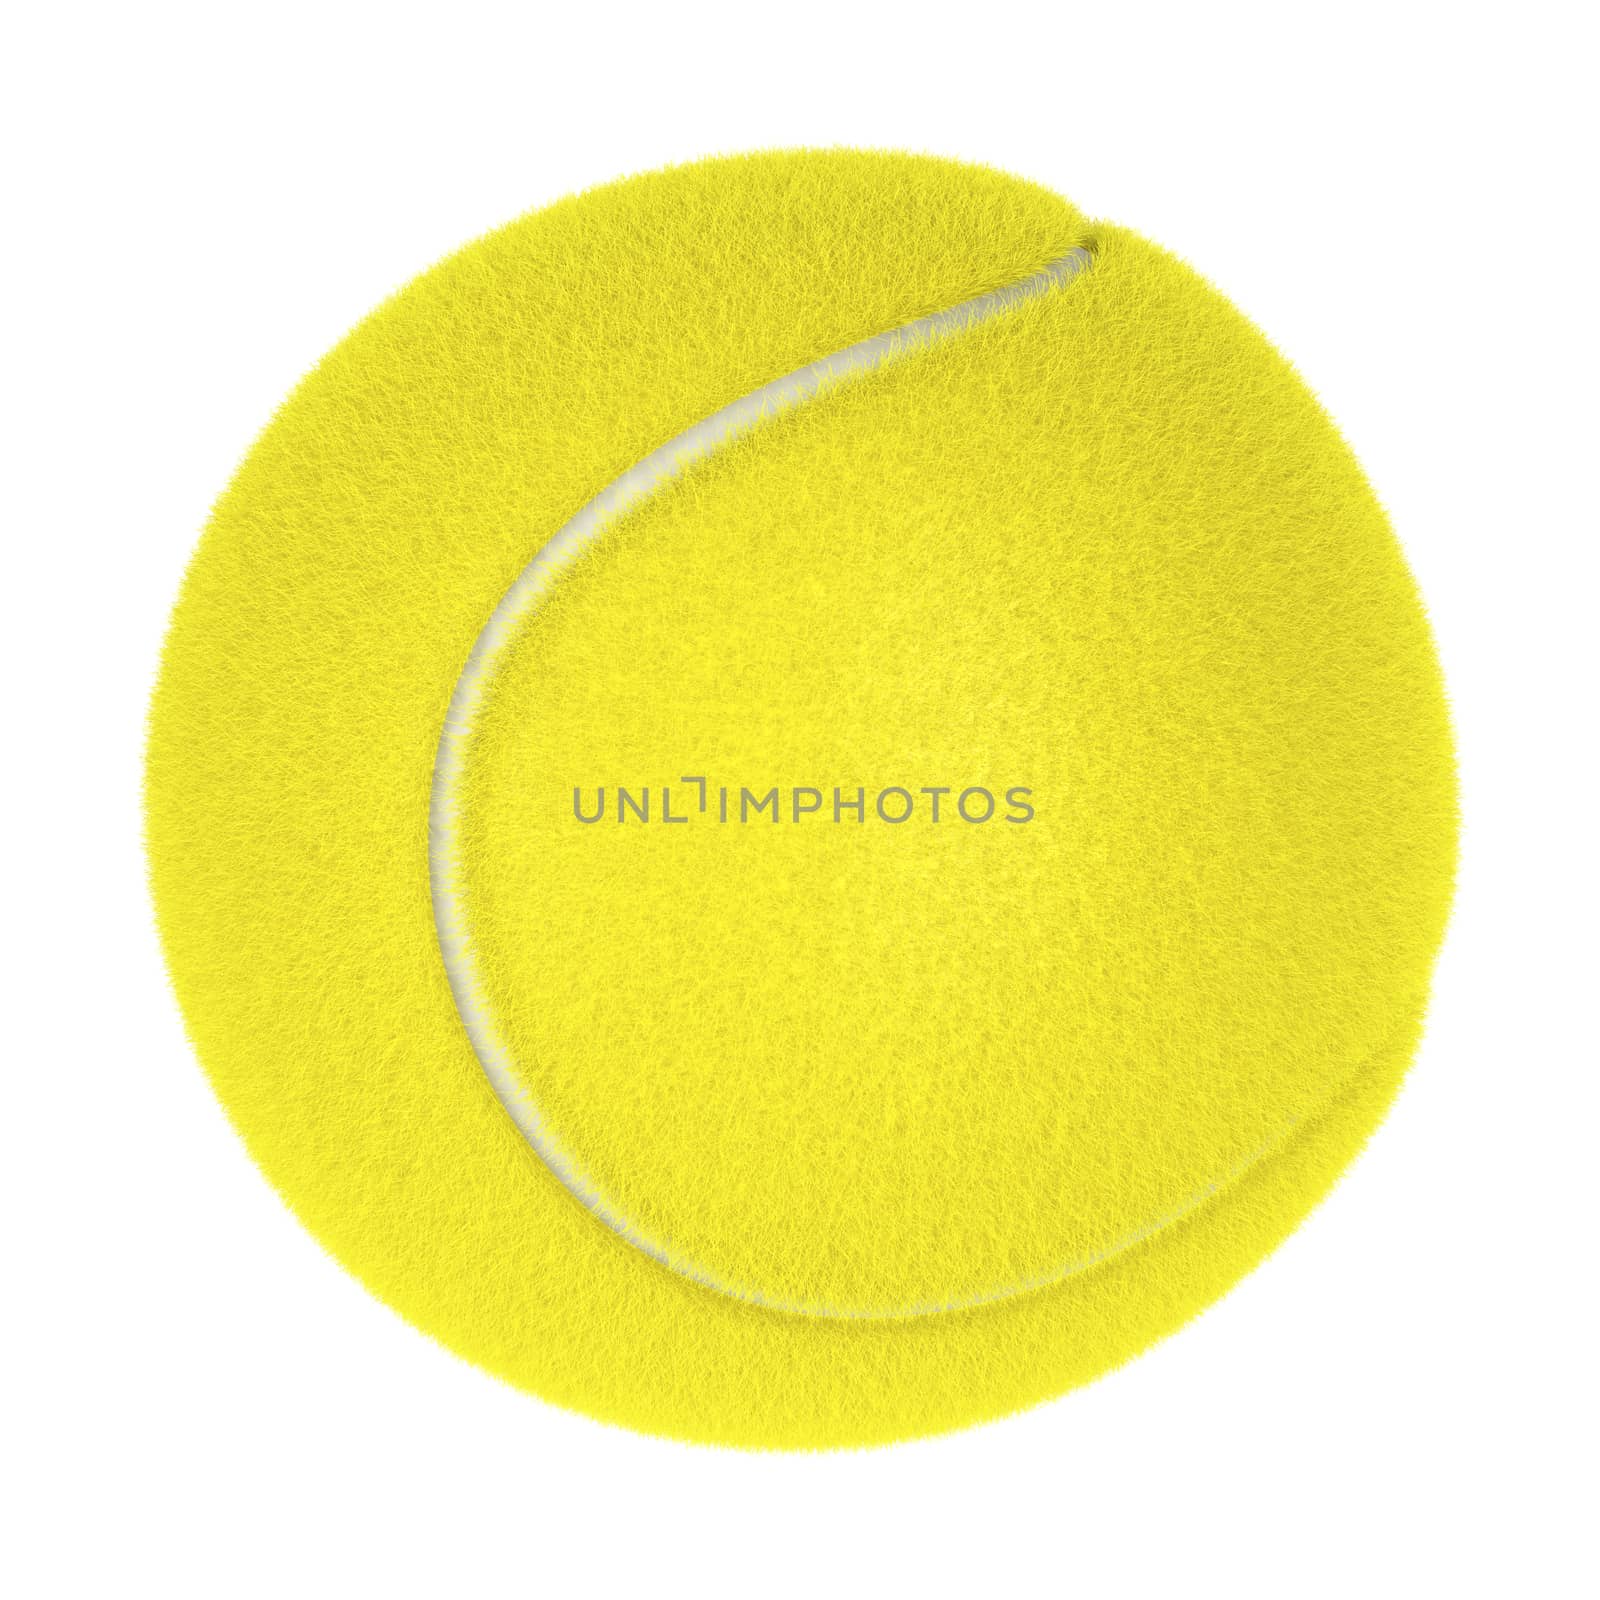 Tennis ball on white by magraphics